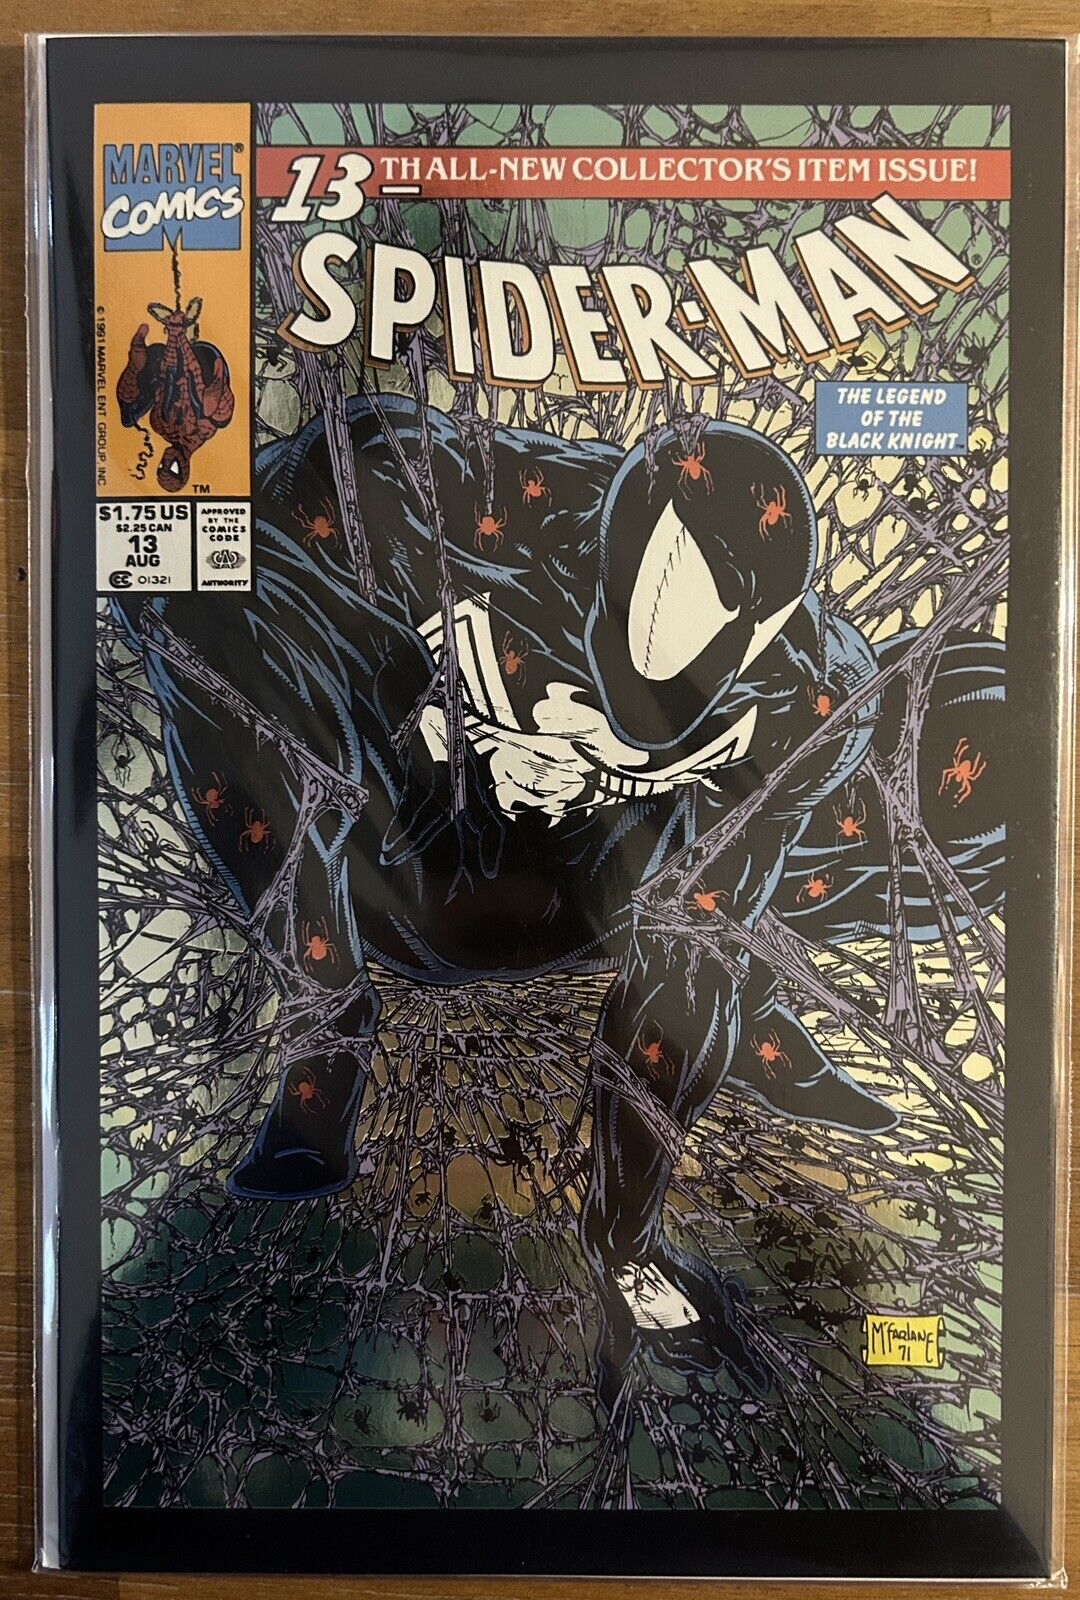 SPIDER-MAN #13 MEXICAN FOIL TODD McFARLANE COVER HOMAGE SPIDER-MAN #1 - NM+